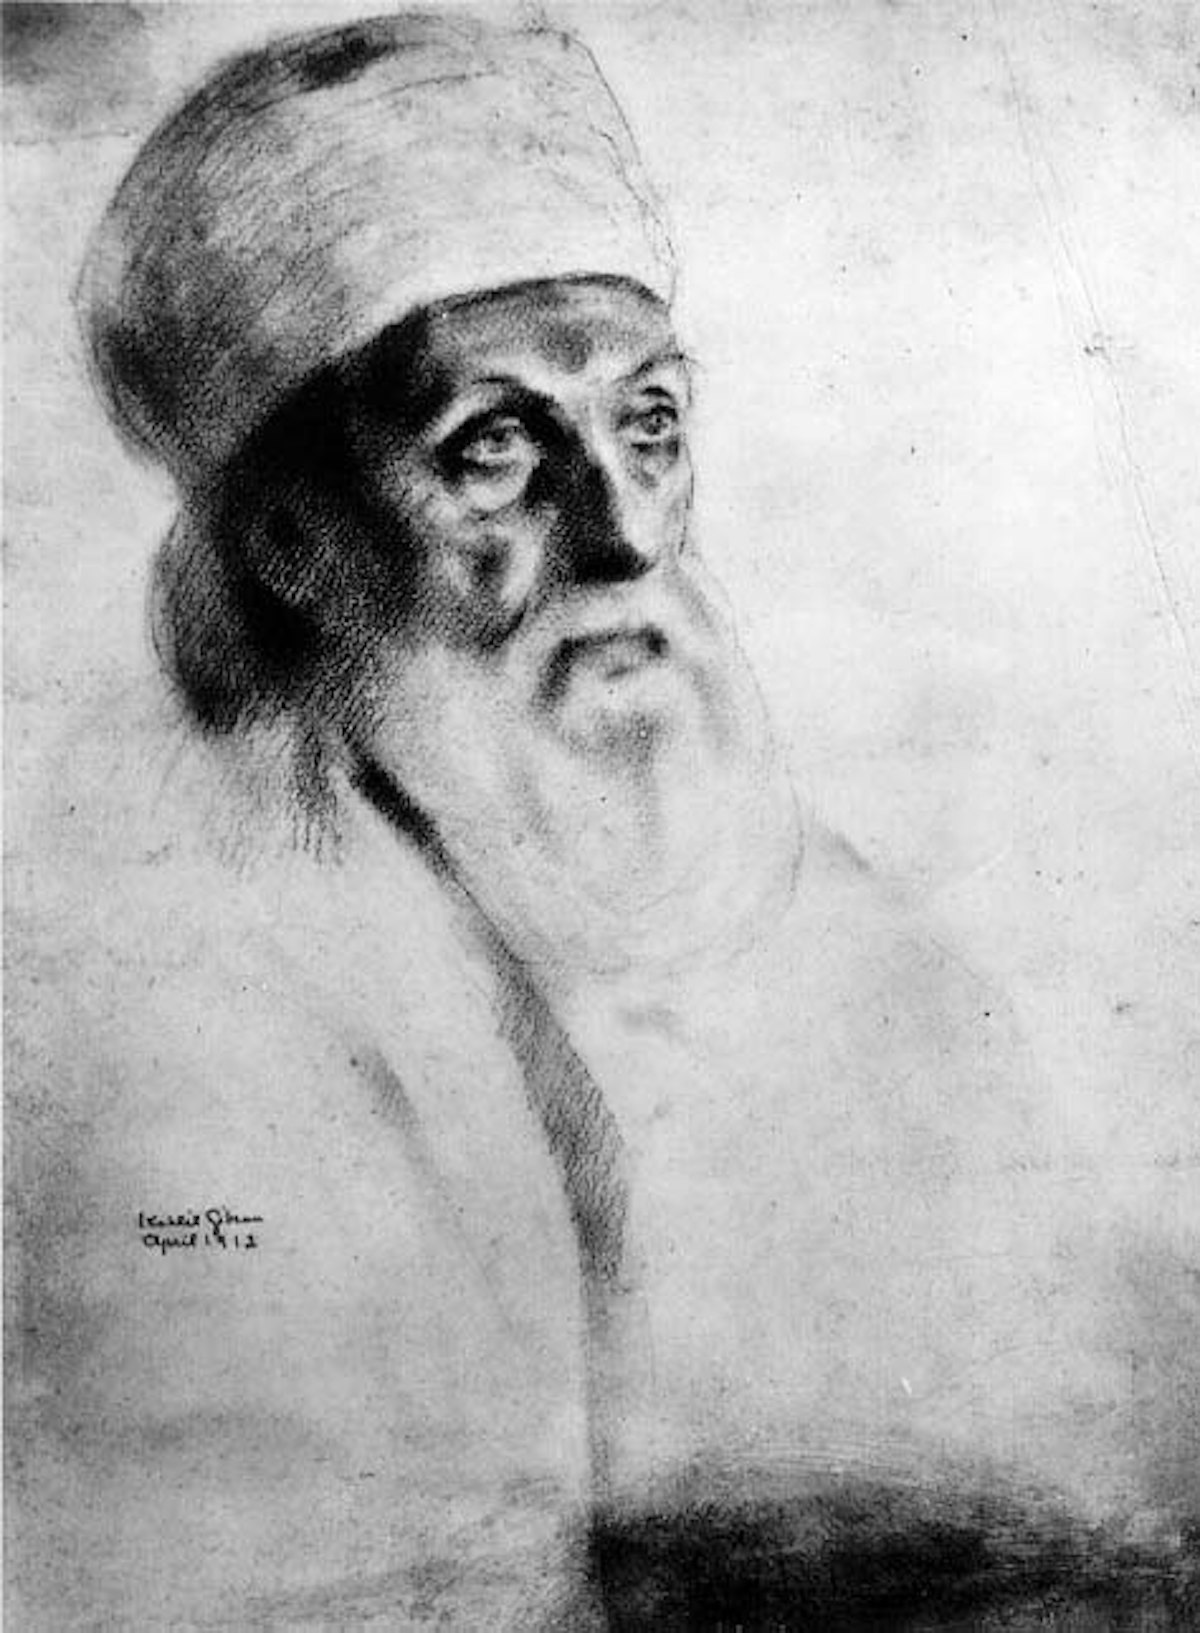 The admiration felt for 'Abdu'l-Baha by Kahlil Gibran, the author of "The Prophet", is also described in Professor Bushrui's book. Gibran was deeply impressed by 'Abdu'l-Baha and sketched his portrait, pictured, when they met in New York. Professor Bushrui – who is the founder and Director of the University of Maryland's Kahlil Gibran Research and Studies Project - recounts how Gibran told friends that 'Abdu'l-Baha provided the template for his portrayal of Christ in "Jesus, The Son of Man".